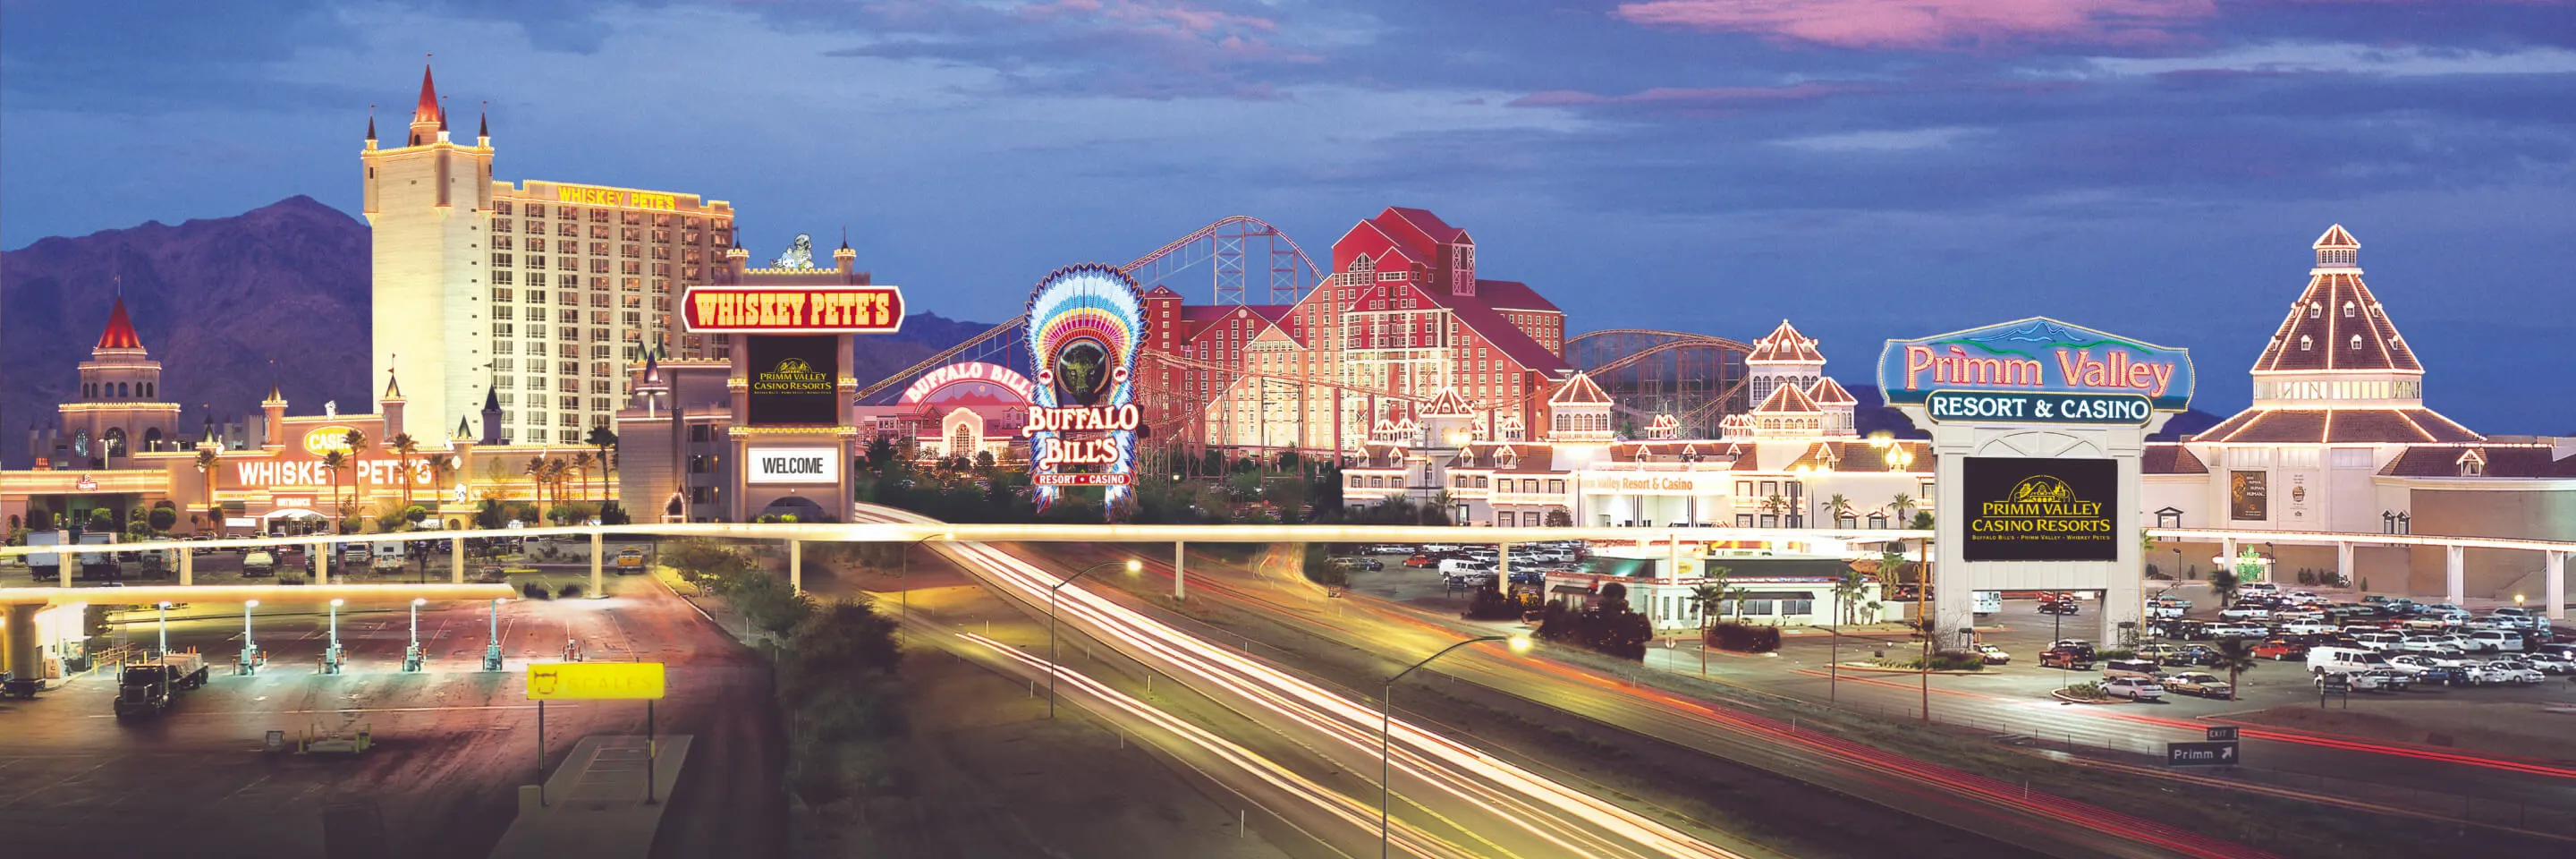 Lost and Found - Primm Valley Resort and Casino